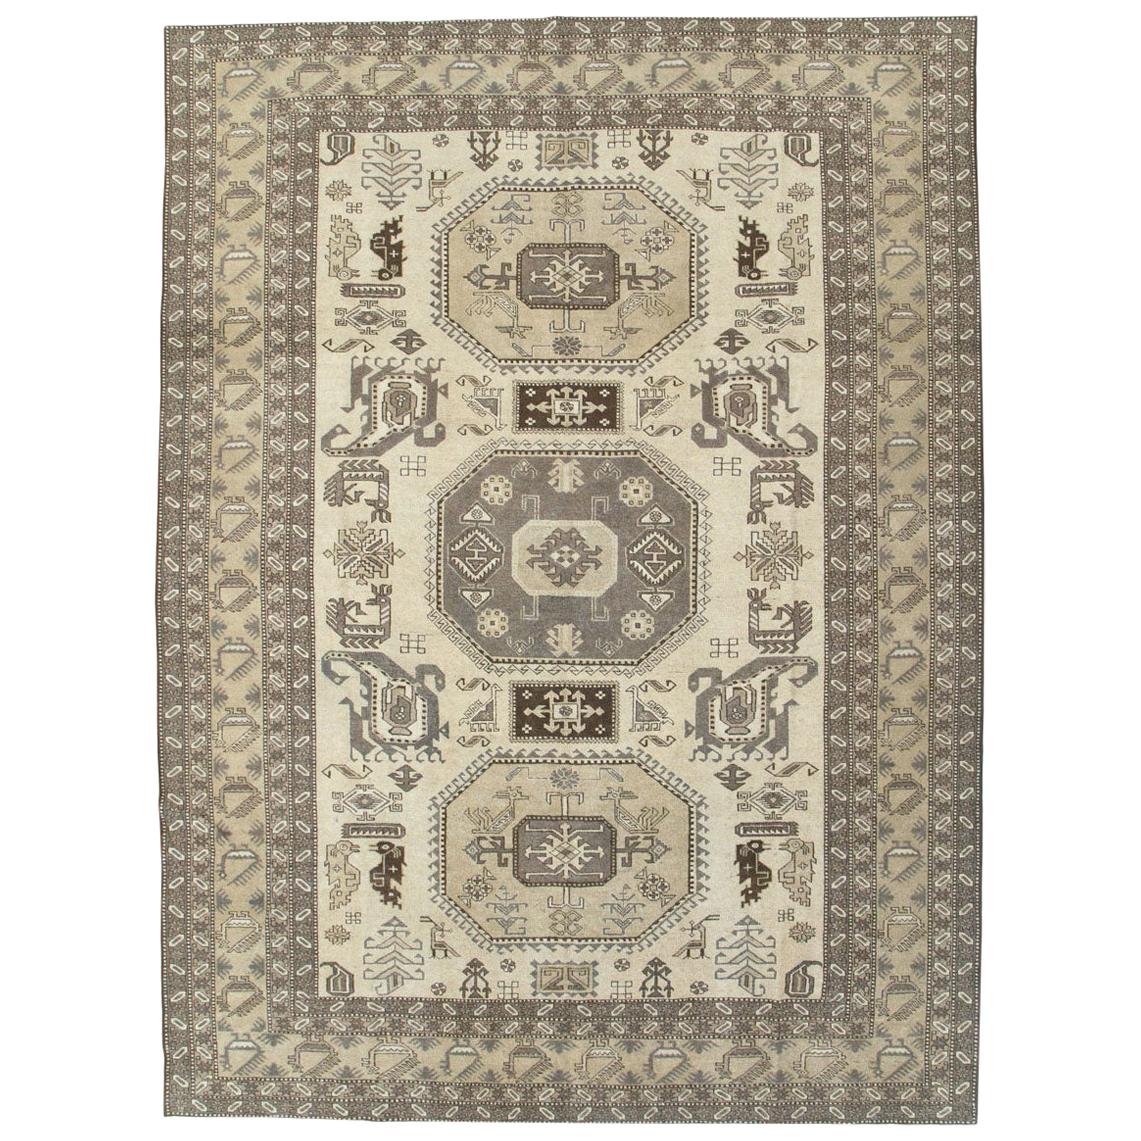 Midcentury Handmade Persian Tribal Room Size Rug in Neutral Colors